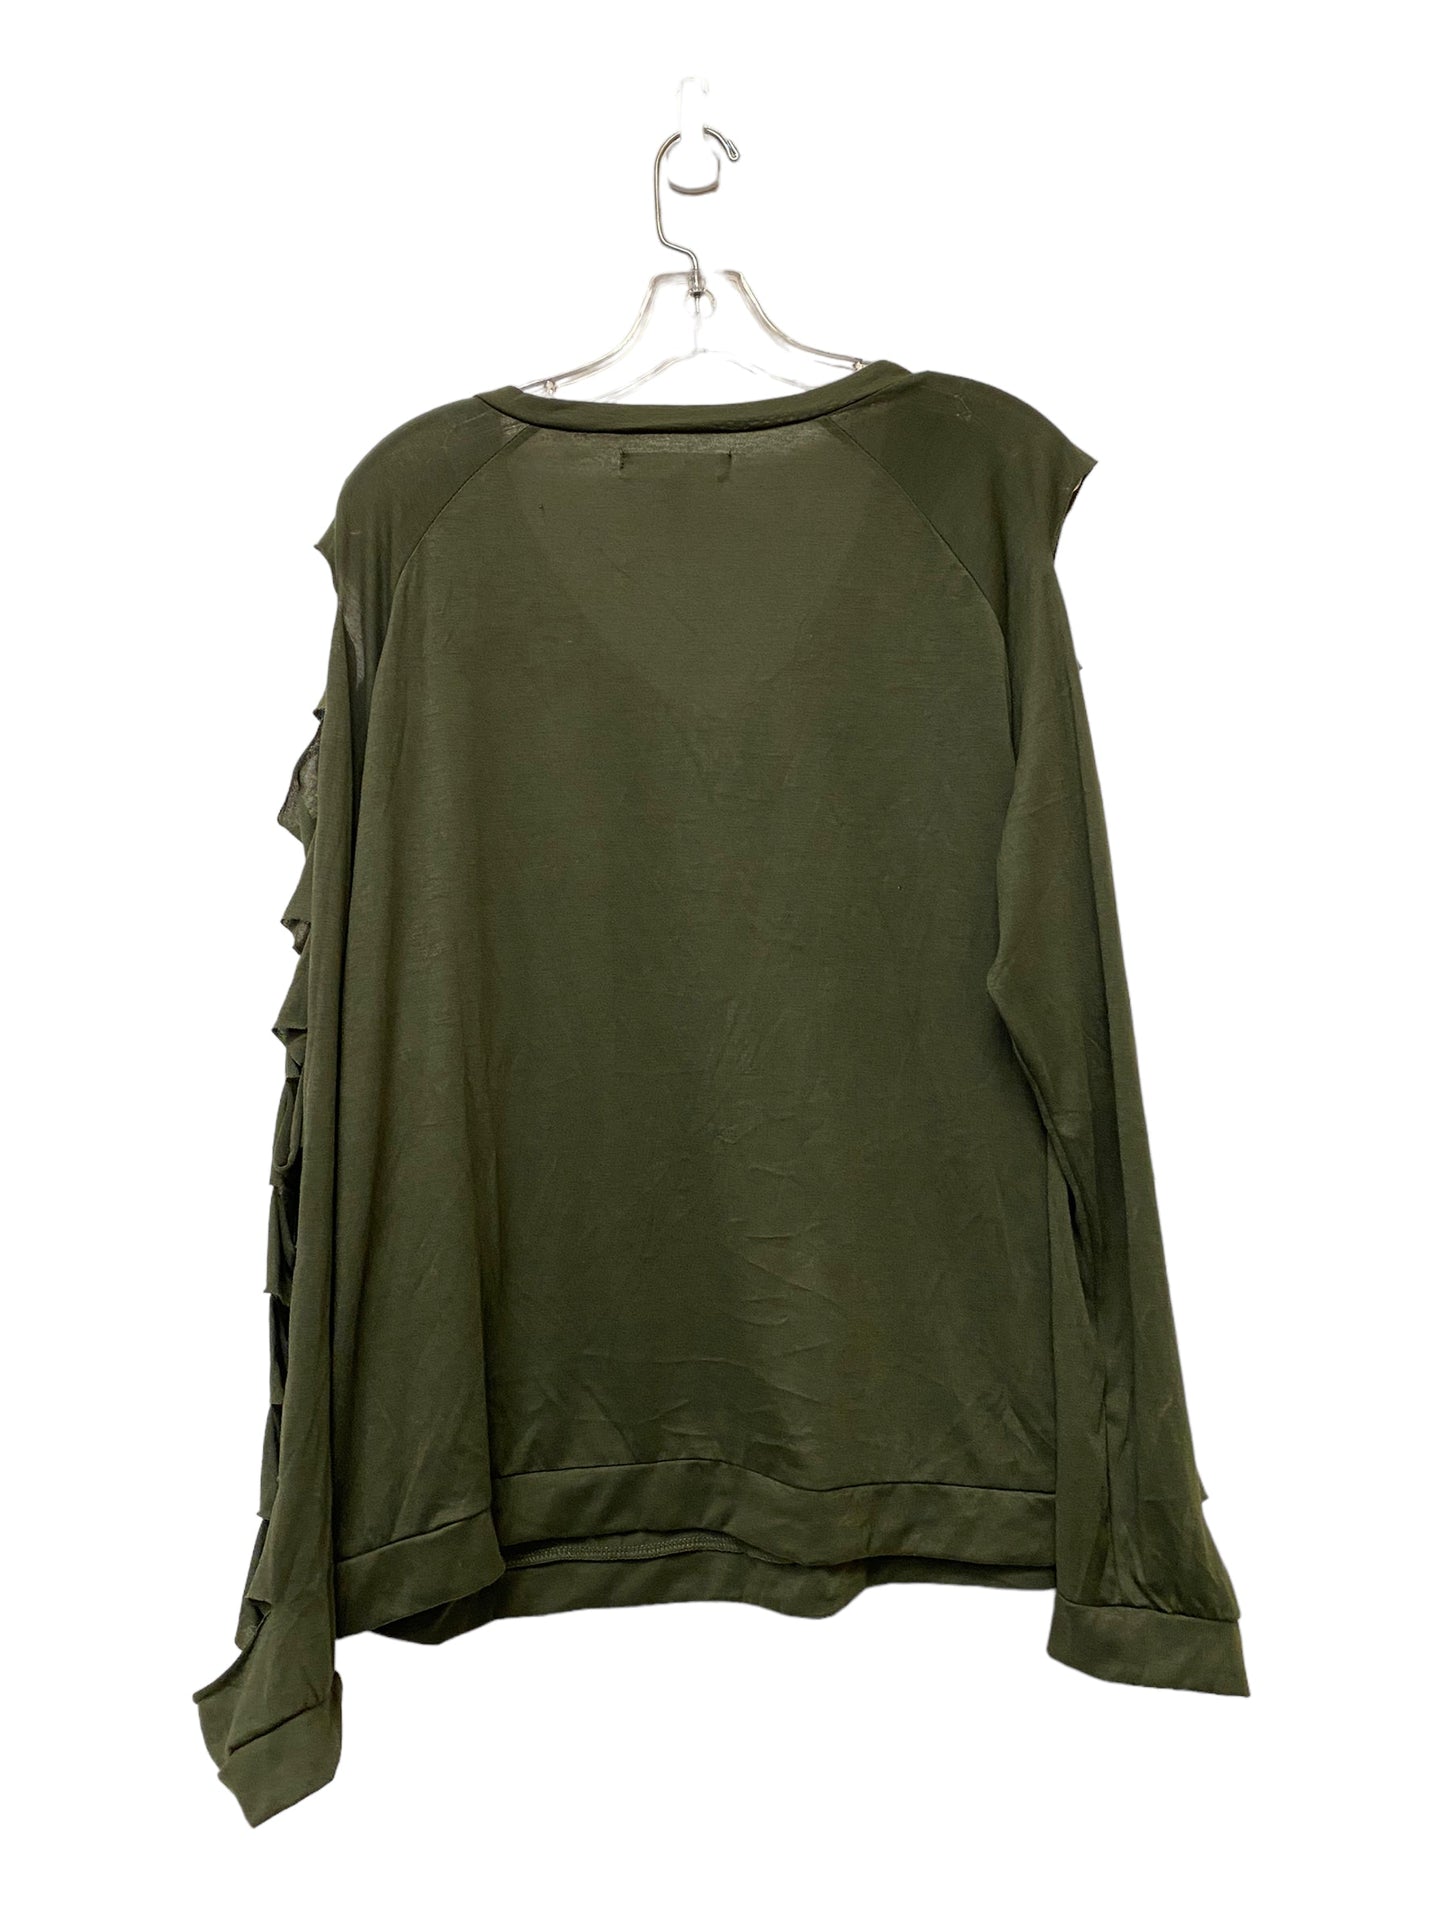 Top Long Sleeve By Eye Candy  Size: 3x